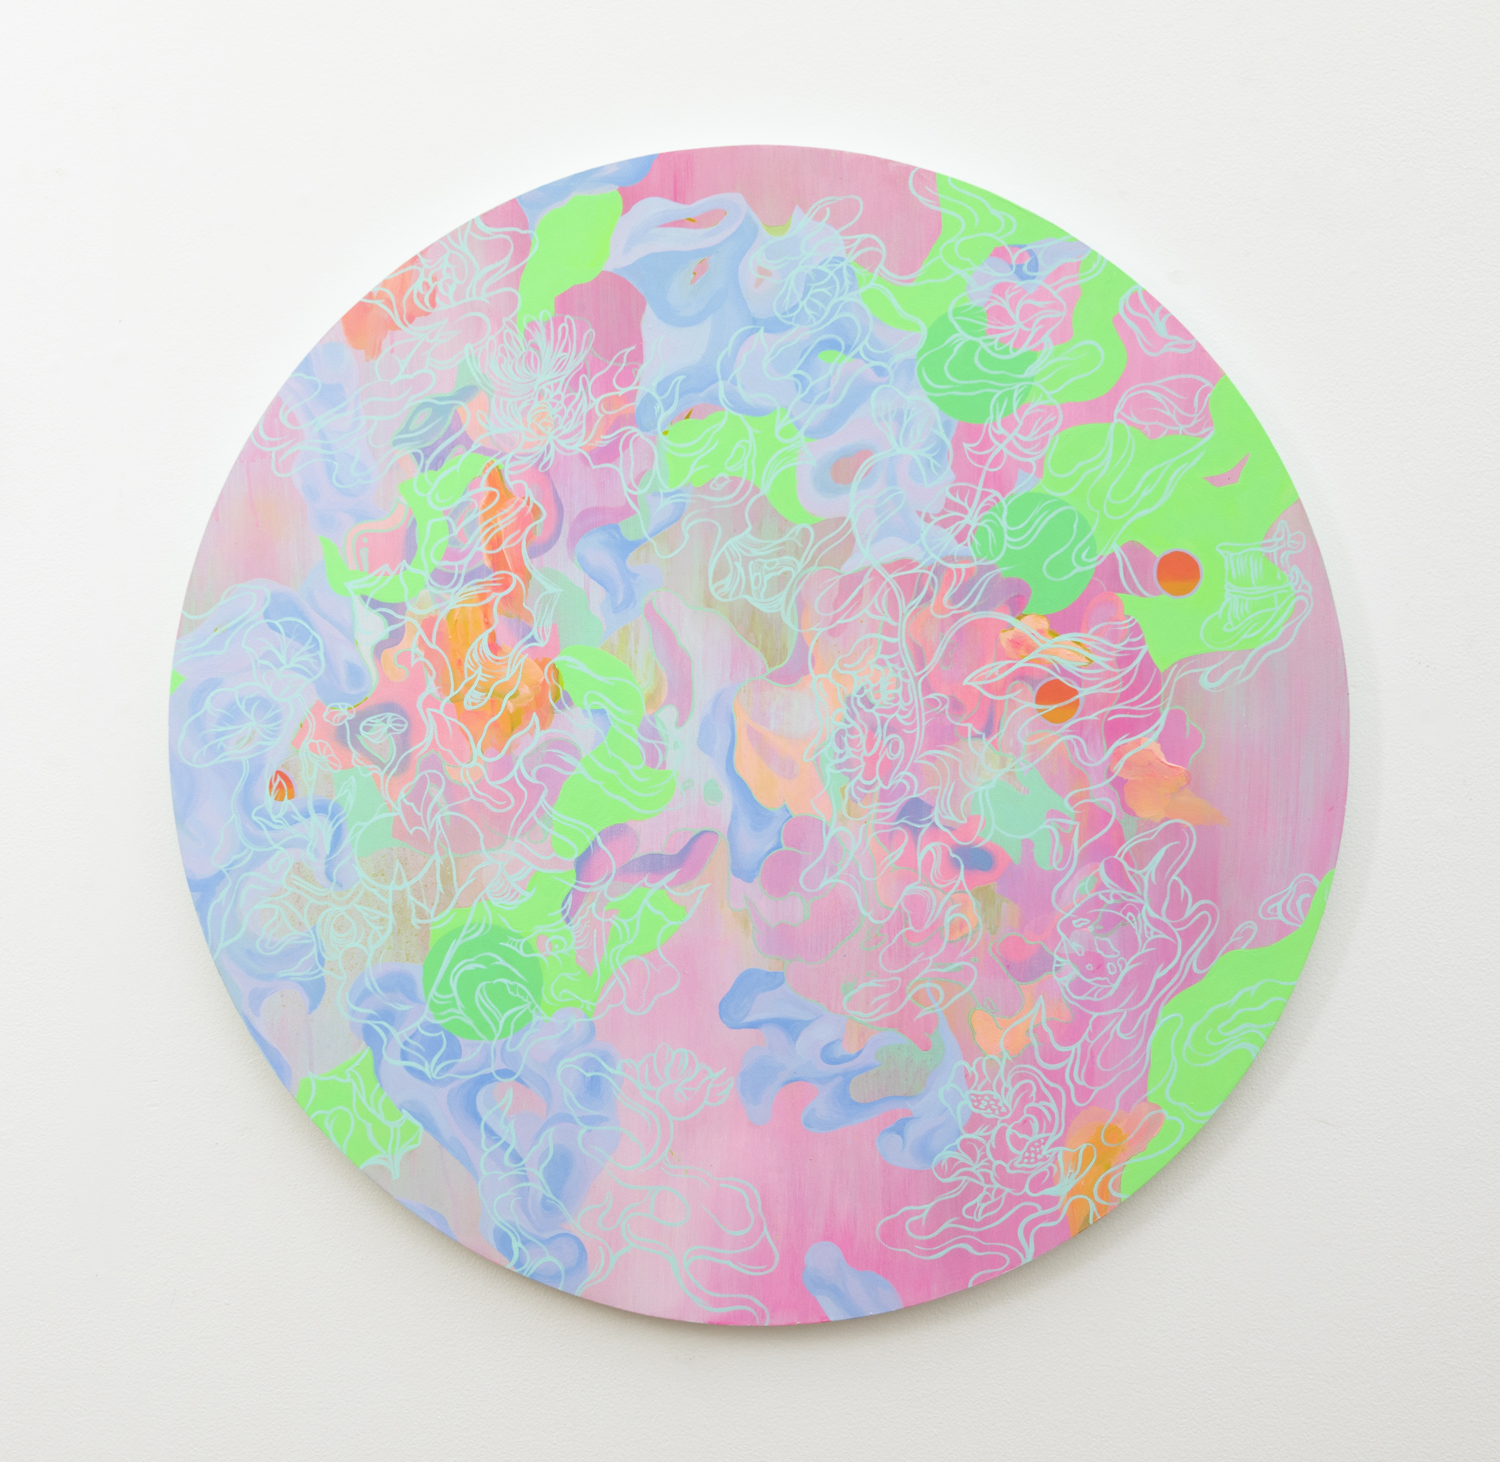 Louise Zhang, Feel my bones crack in your arms, 2019, Acrylic on board, 90cm diameter. Photo credit: Silversalt Photography.